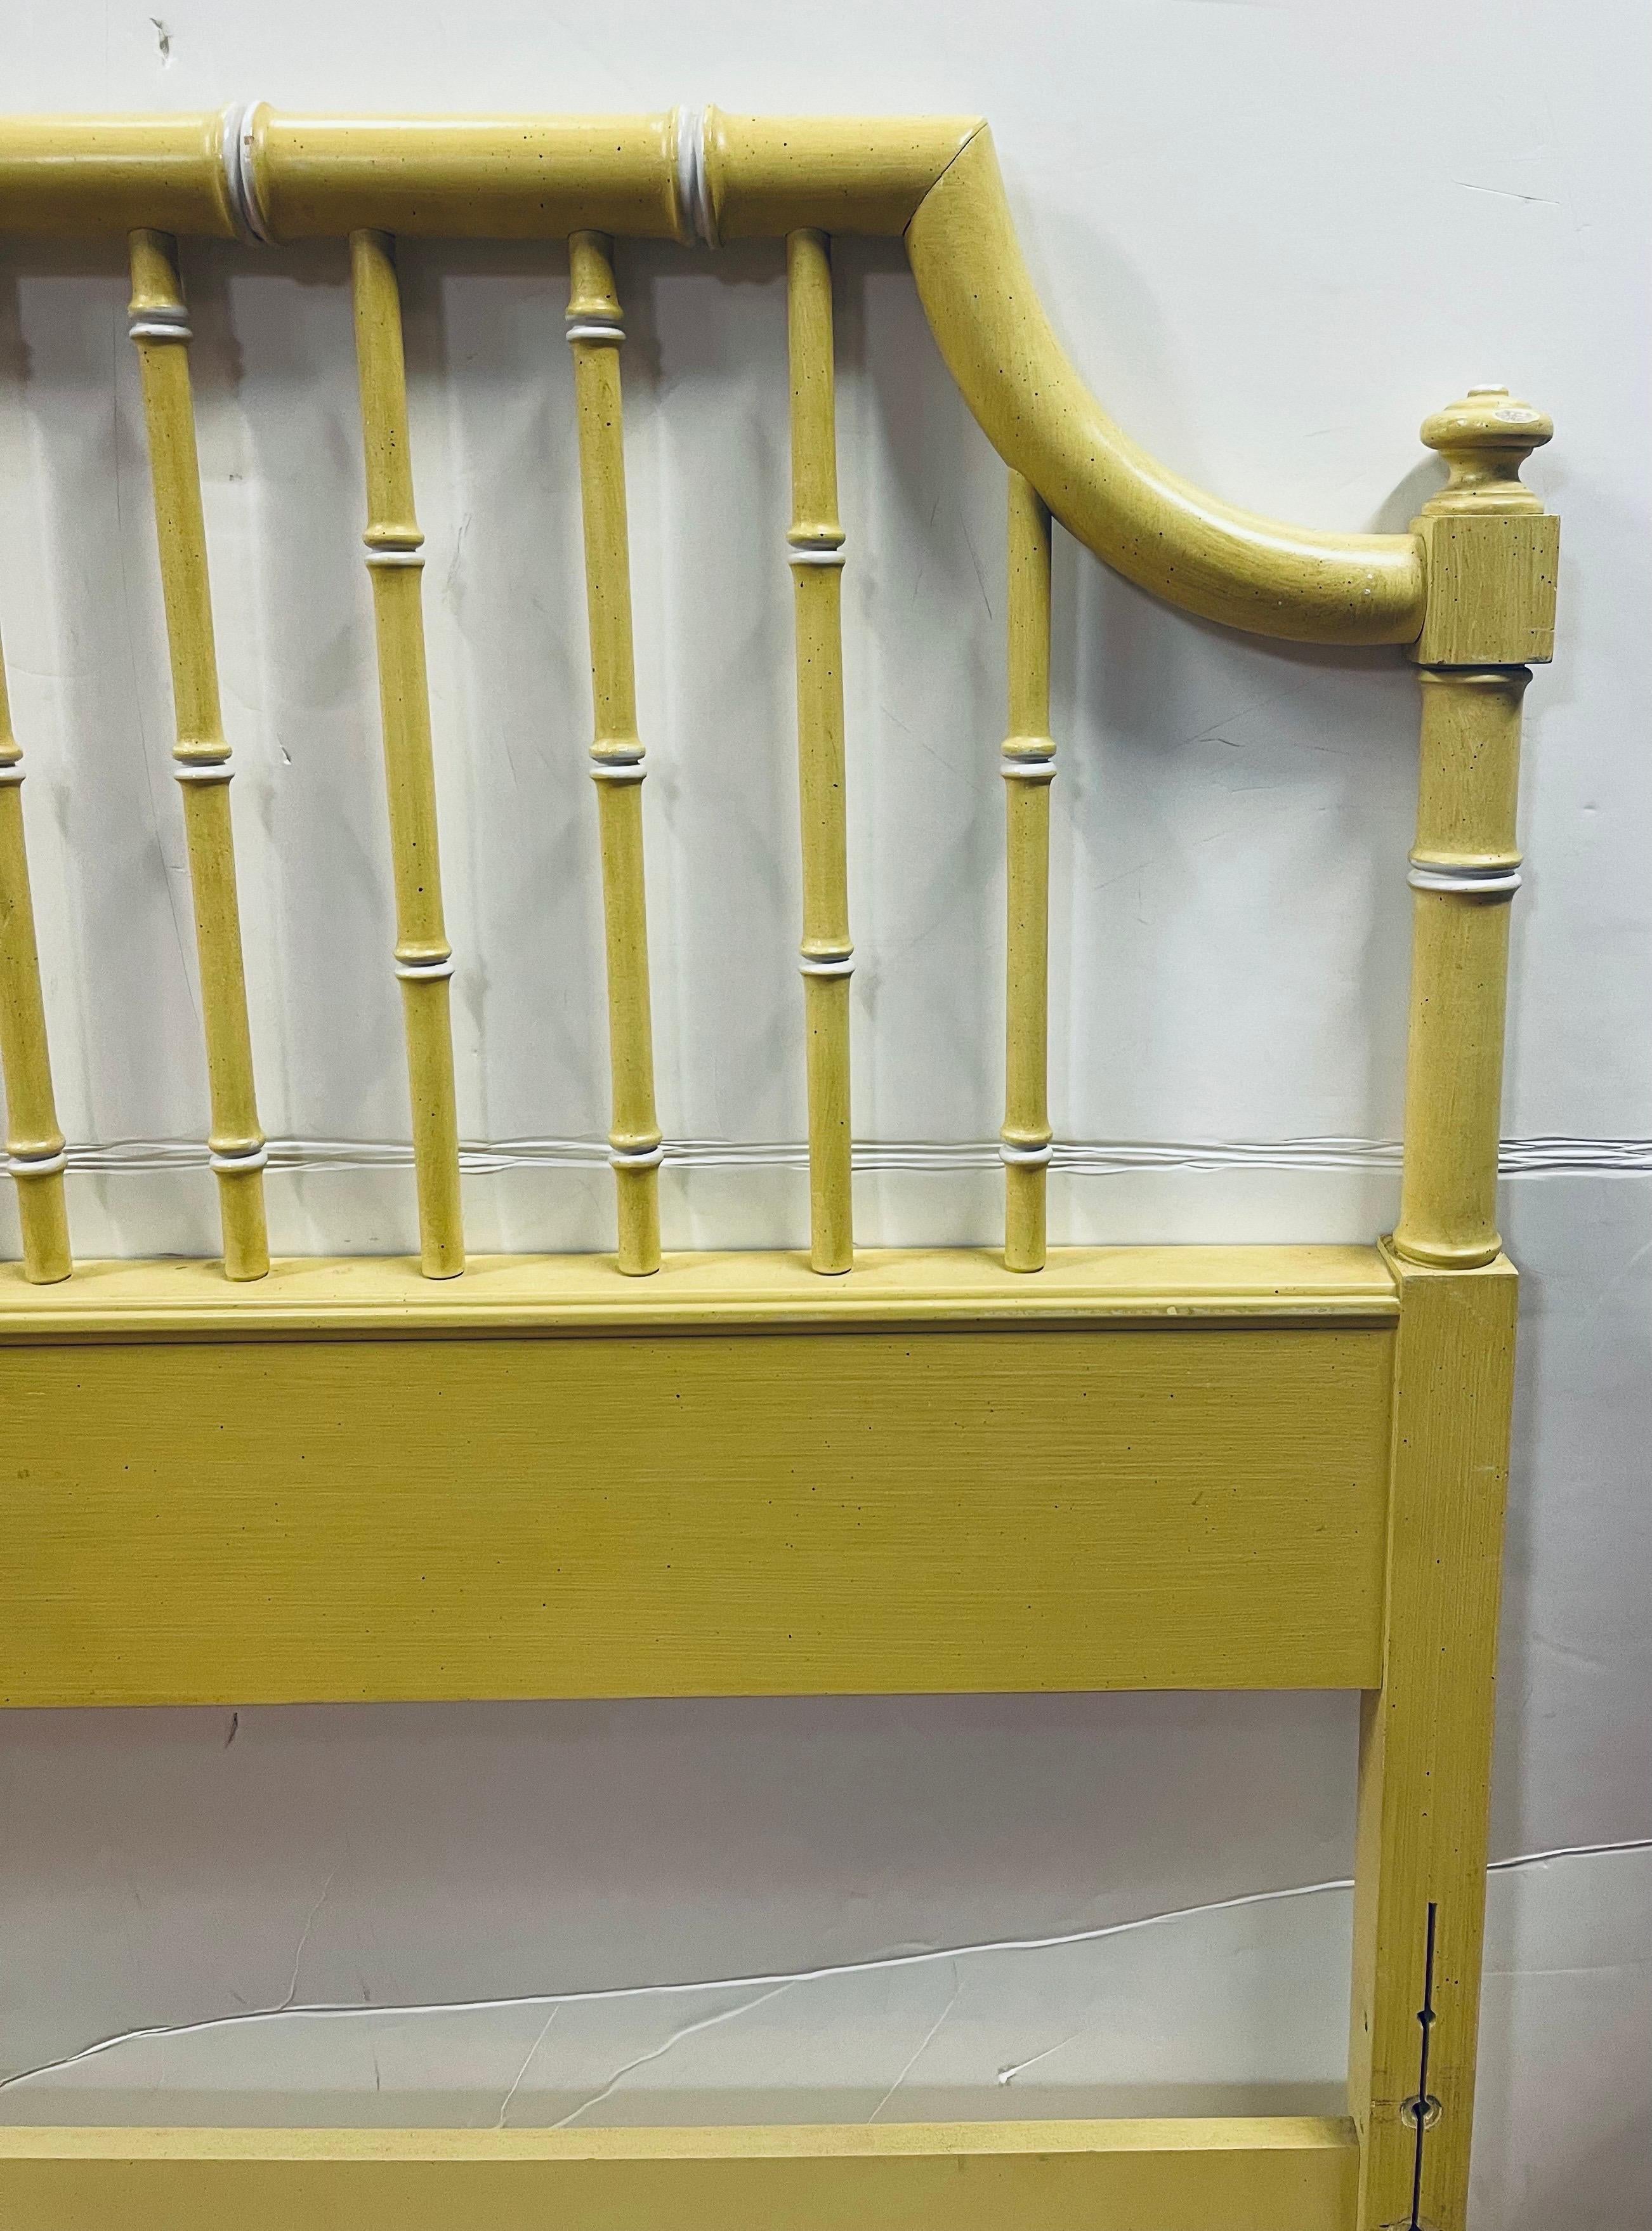 Rare faux bamboo twin headboard only - not footboard, etc, from Thomasville's rare and coveted Allegro line.  Faux bamboo styling and yellow in color.  See our other Allegro pieces this week as well.